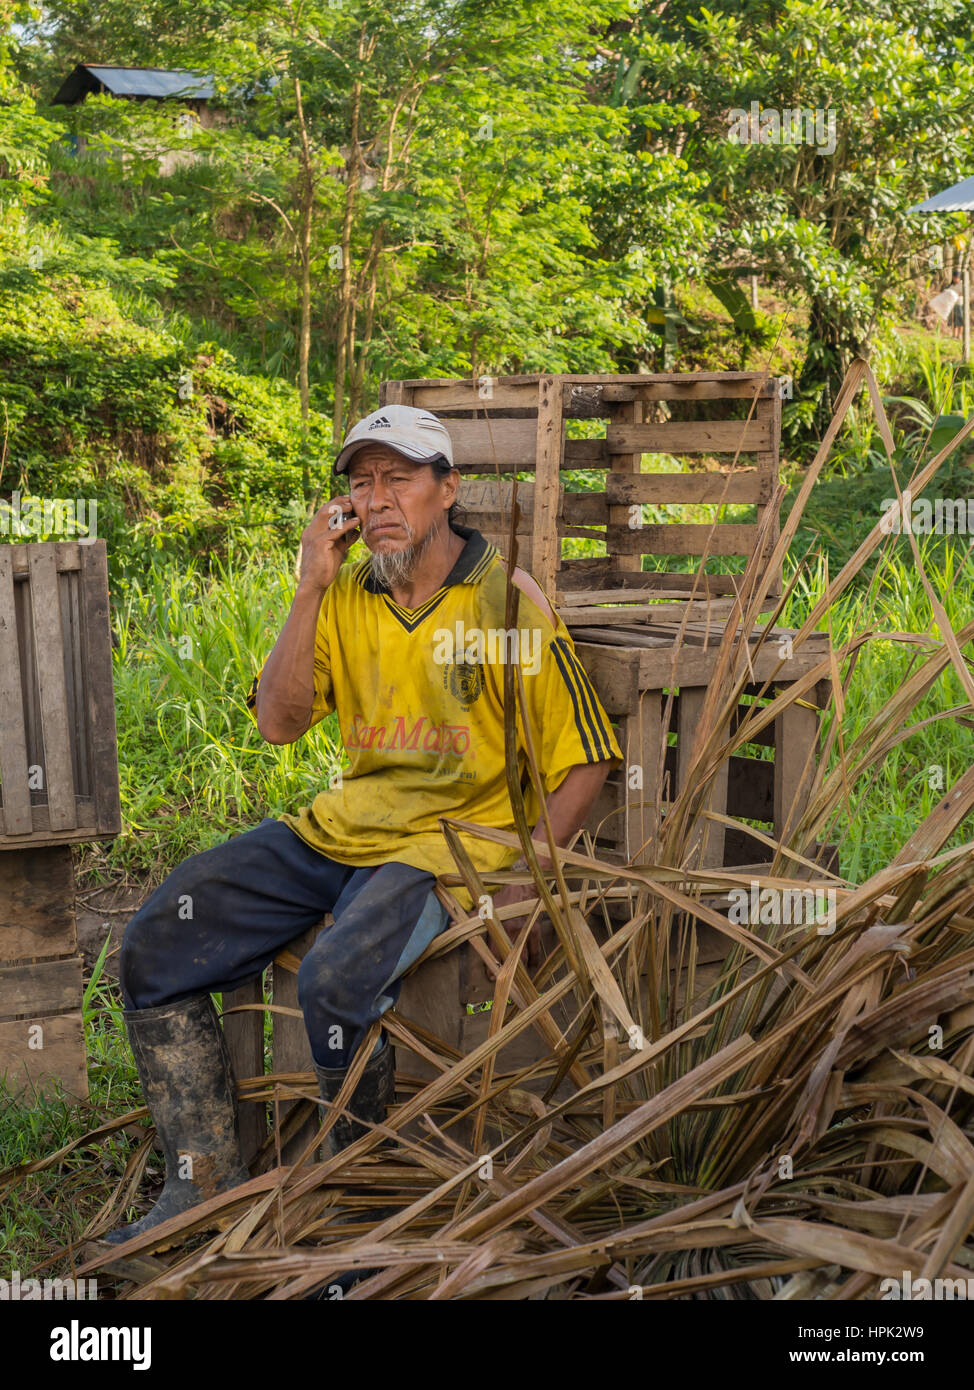 Jungle, Brazil - May 8, 2016:  Portrait of a man with a red skin in the Amazon  jungle Stock Photo